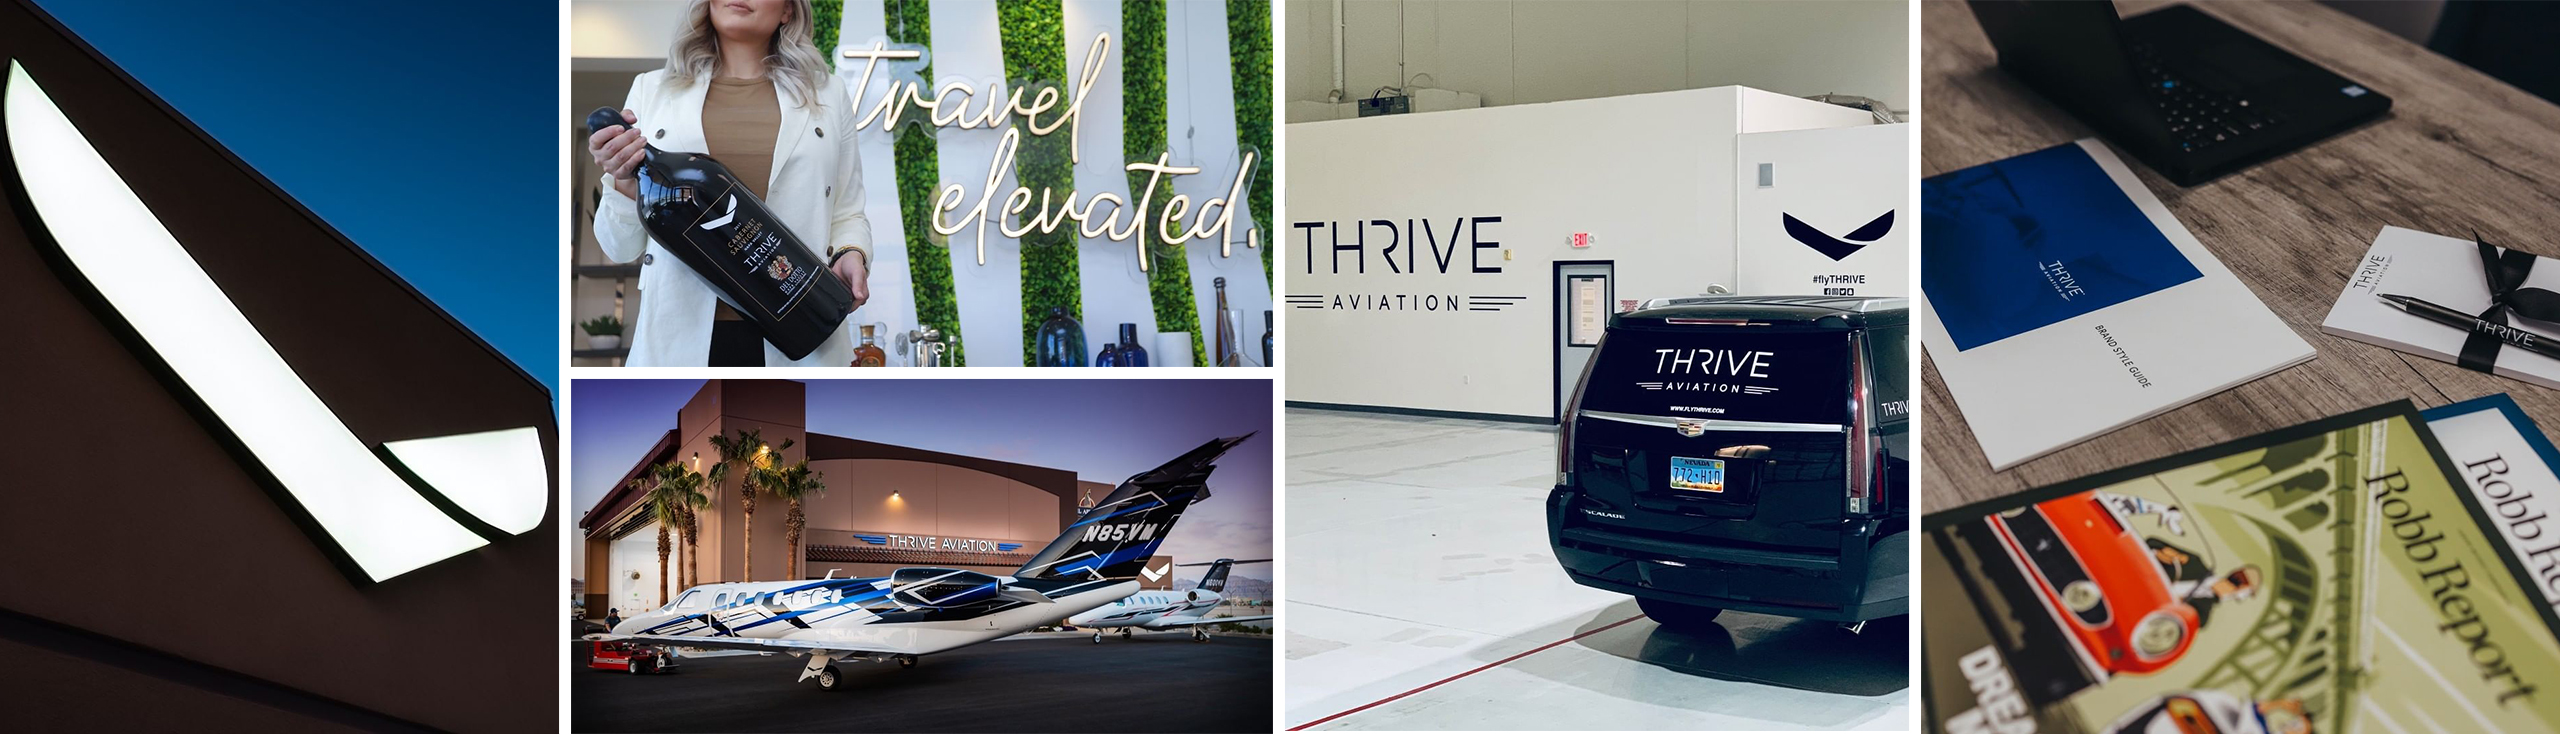 Thrive Image Collage